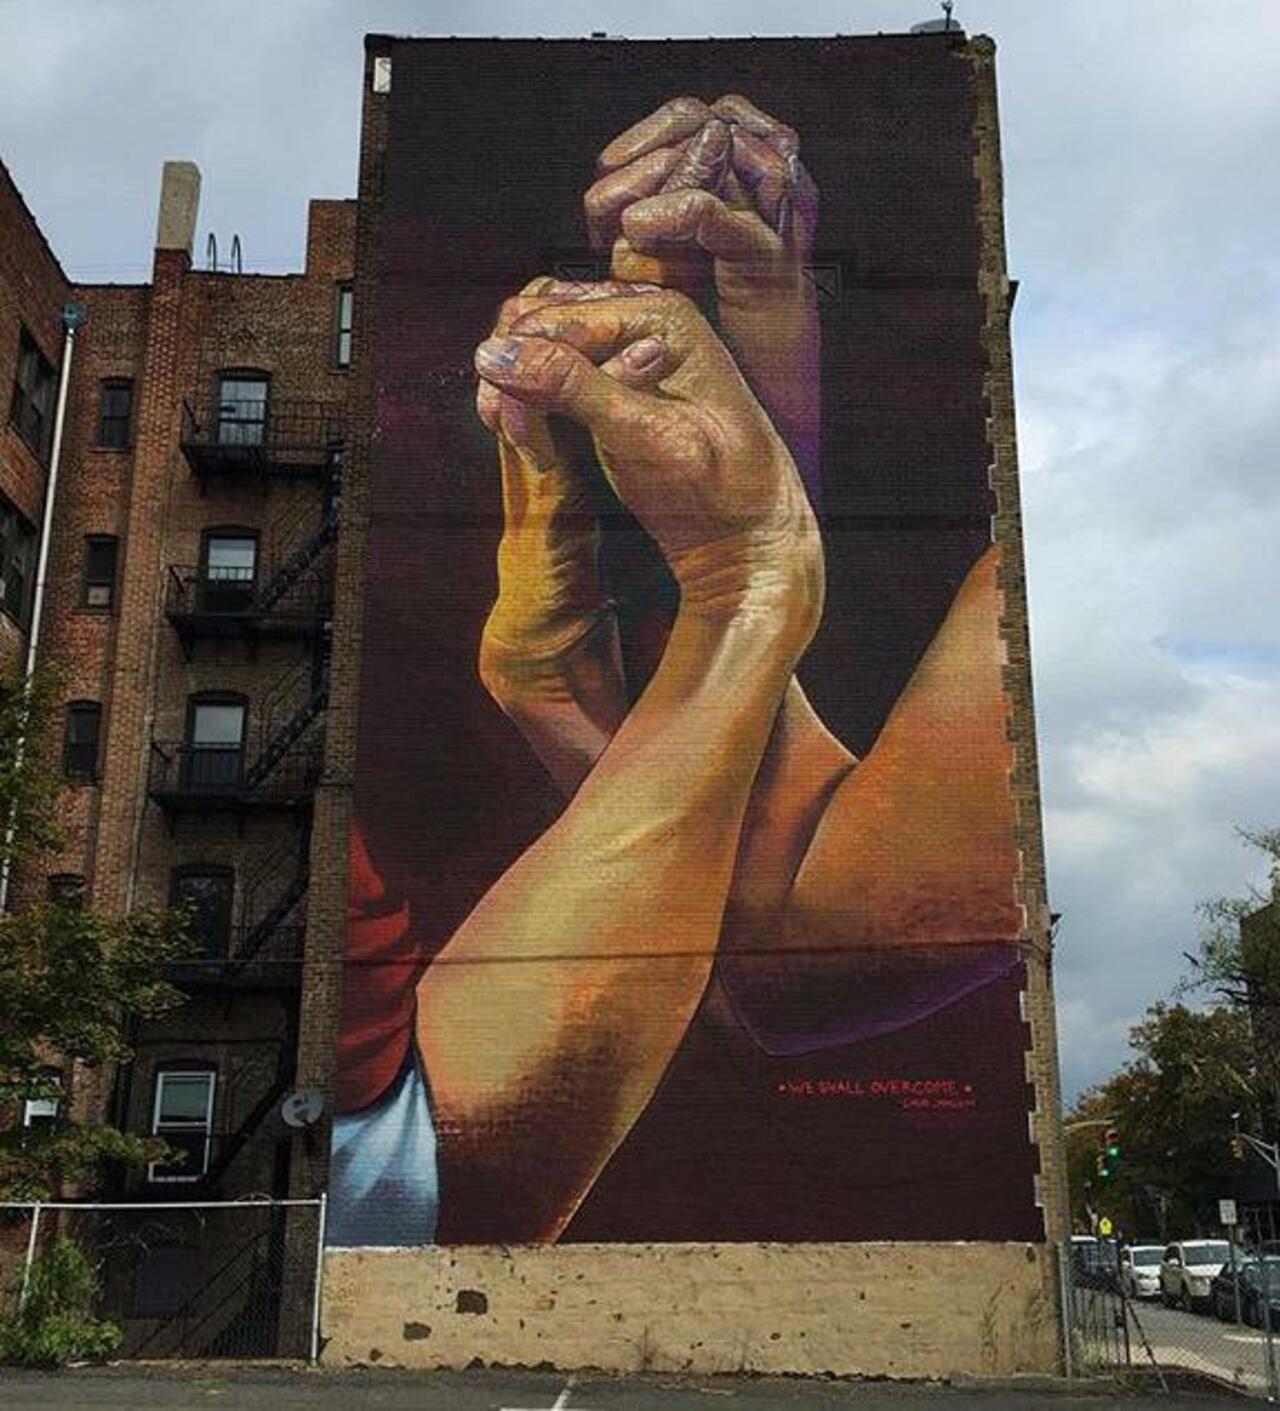 New Street Art by CaseMaclaim in Jersey City for the TheBKcollective 

#art #graffiti #mural #streetart http://t.co/mAxP6Kt1JD